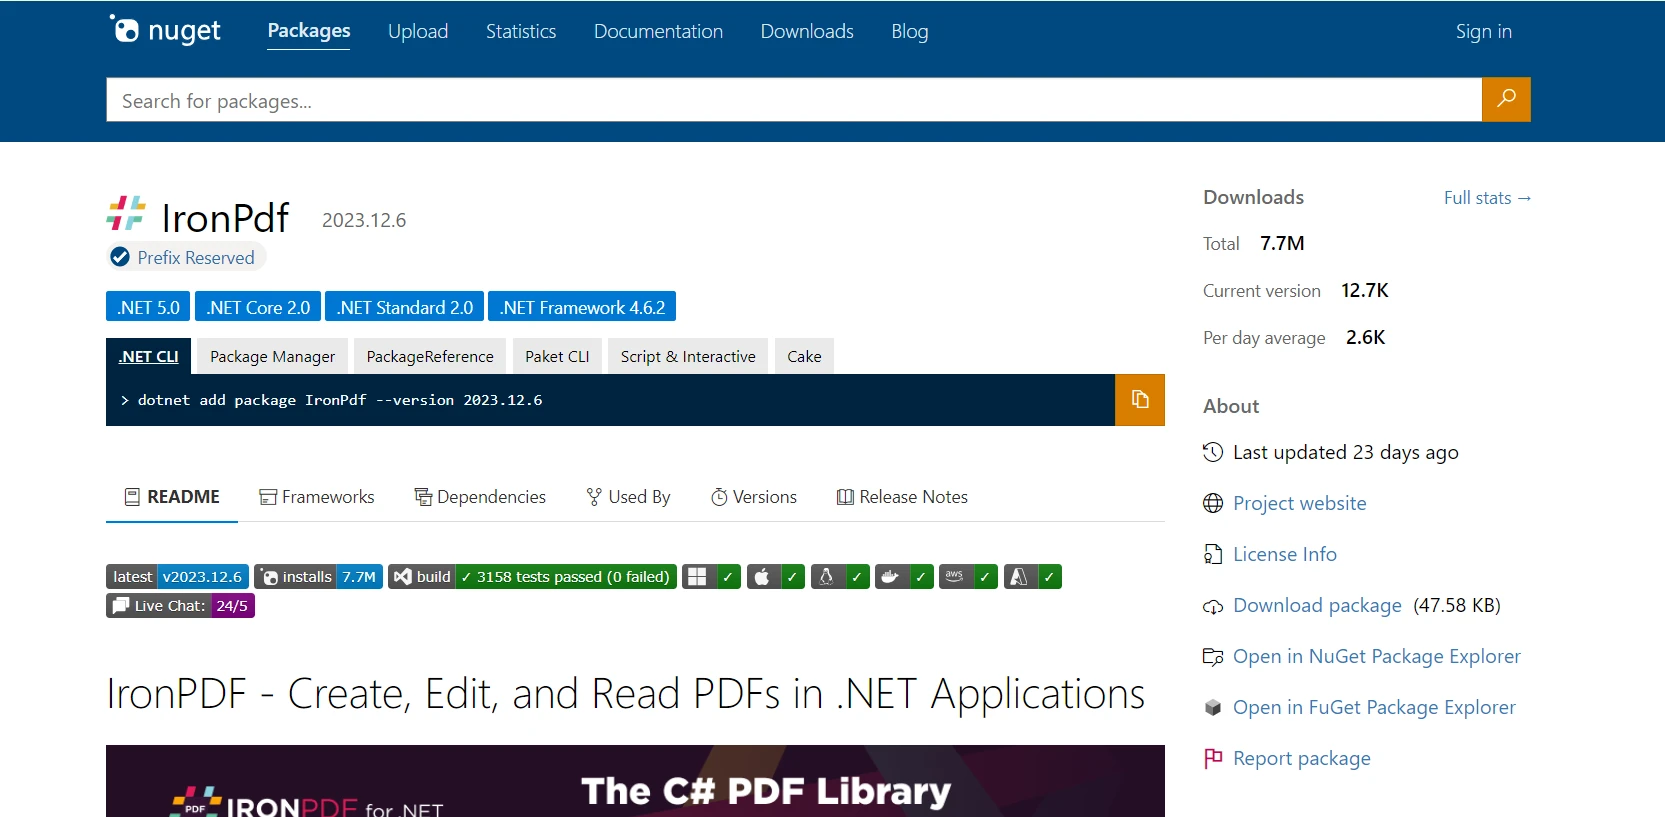 A Comparison Between IronPDF and PdfPig: Figure 10 - You can also download the IronPDF package directly from the web page by clicking on the "Download package" option: "https://www.nuget.org/packages/IronPdf/". Download the .nupkg file and then manually integrate it into your project.